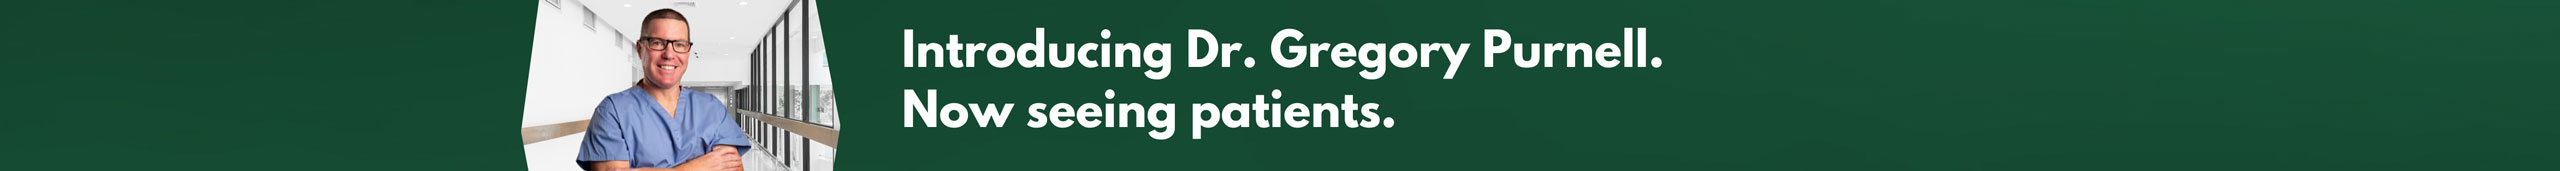 Orthopedic Surgeon, Dr. Gregory Purnell 